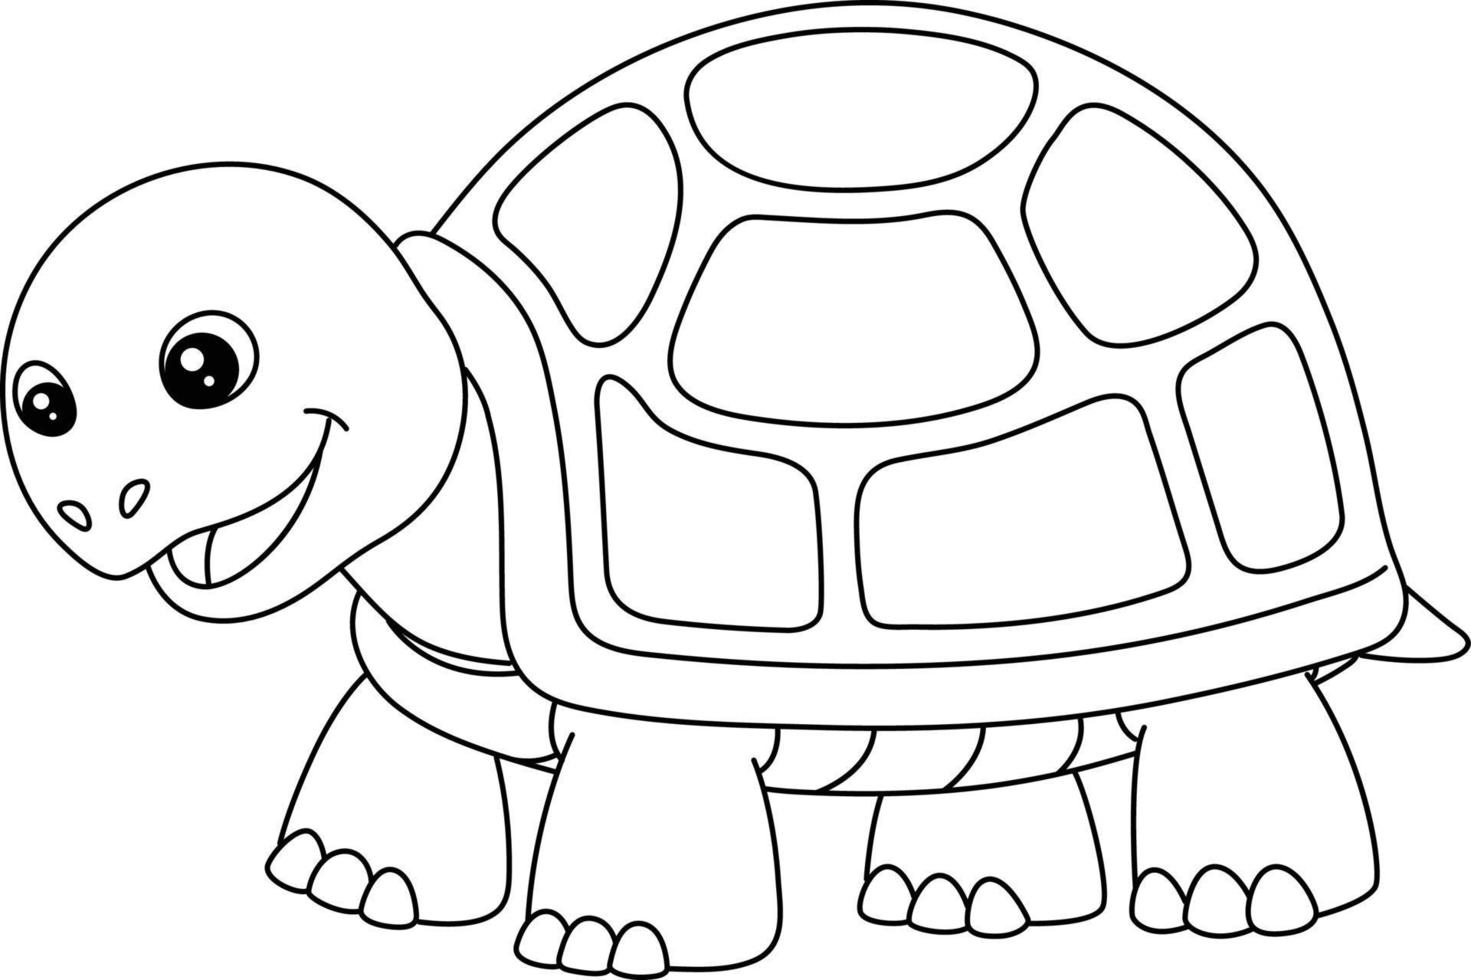 Turtle Coloring Page Isolated for Kids 20 Vector Art at Vecteezy